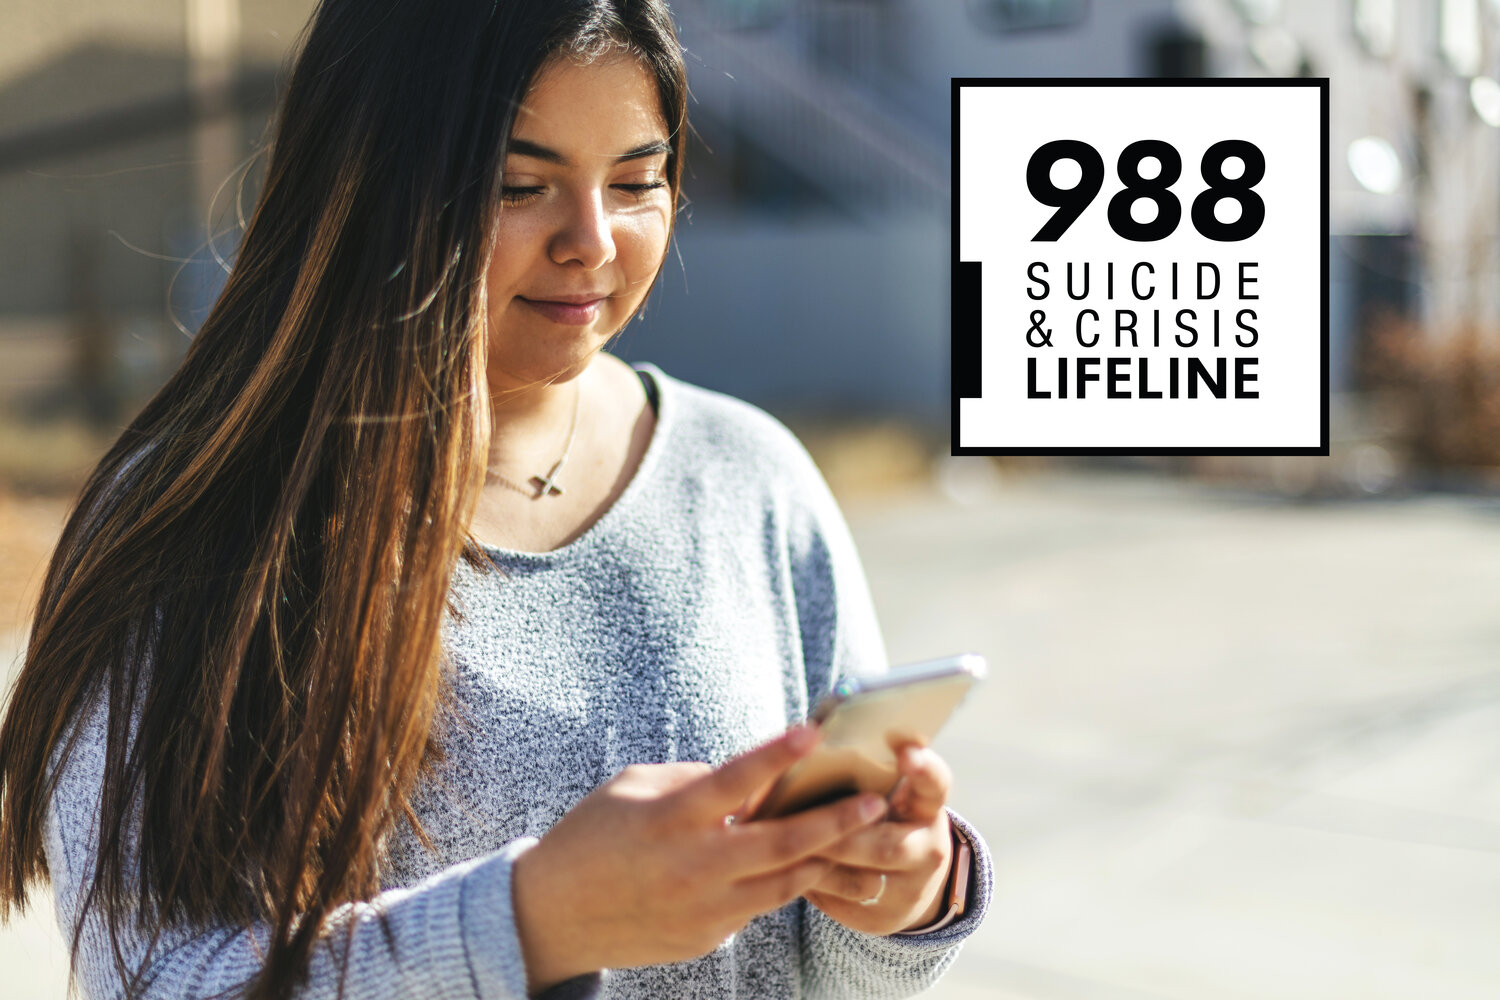 Help is available 24 hours a day at 988, but teens can make a difference when given a chance.